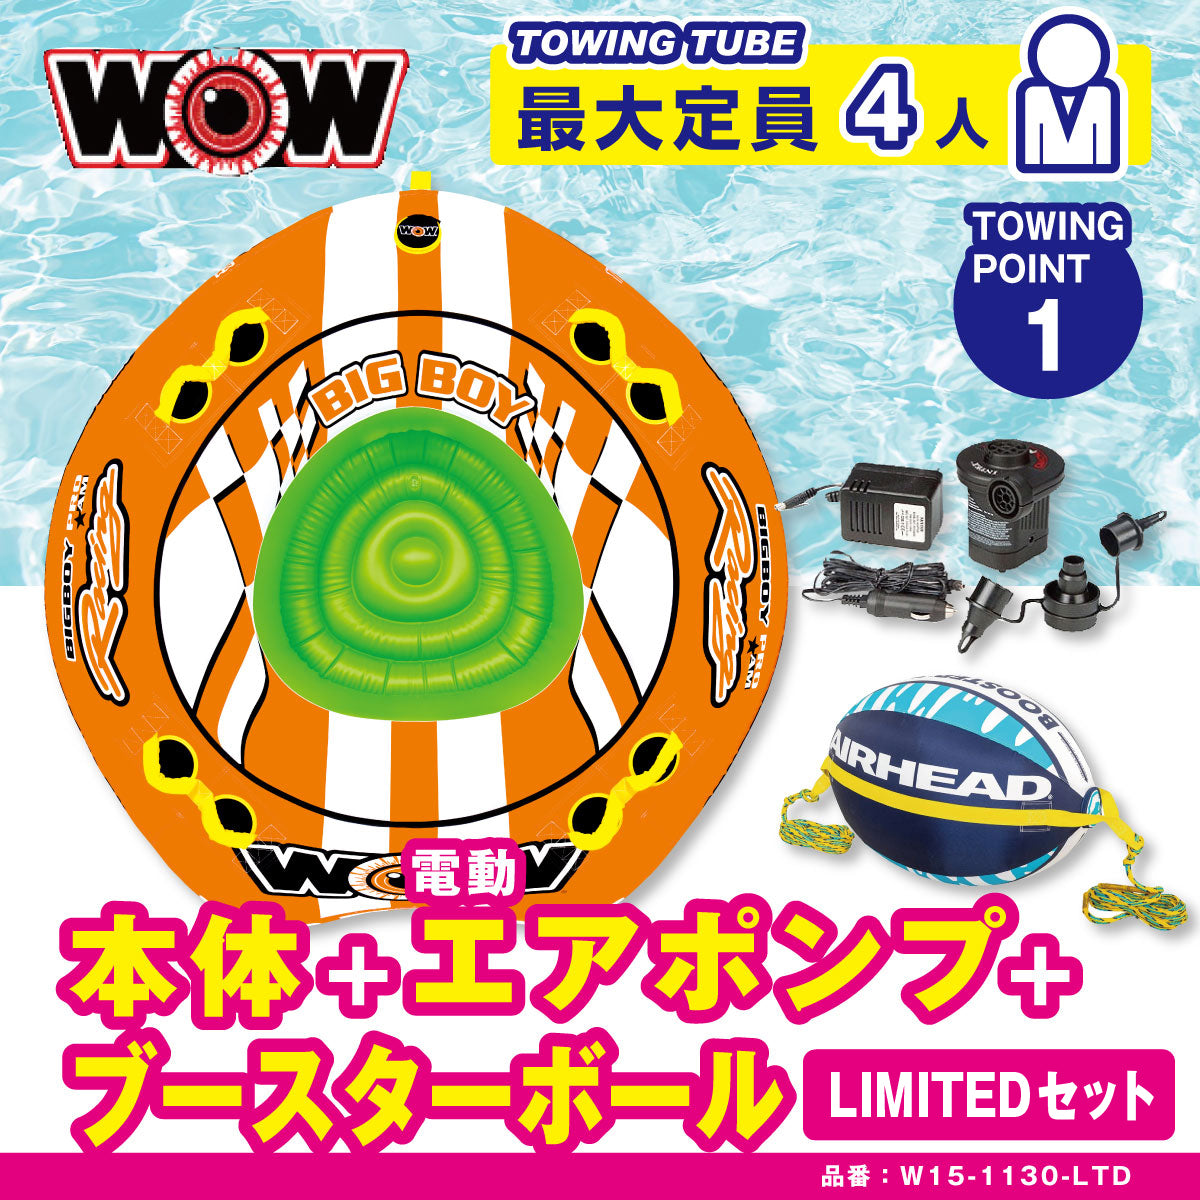 [Limited Set] WOW BIGBOY RACING W15-1130 Water Toy Banana Boat Towing Tube Rubber Boat 